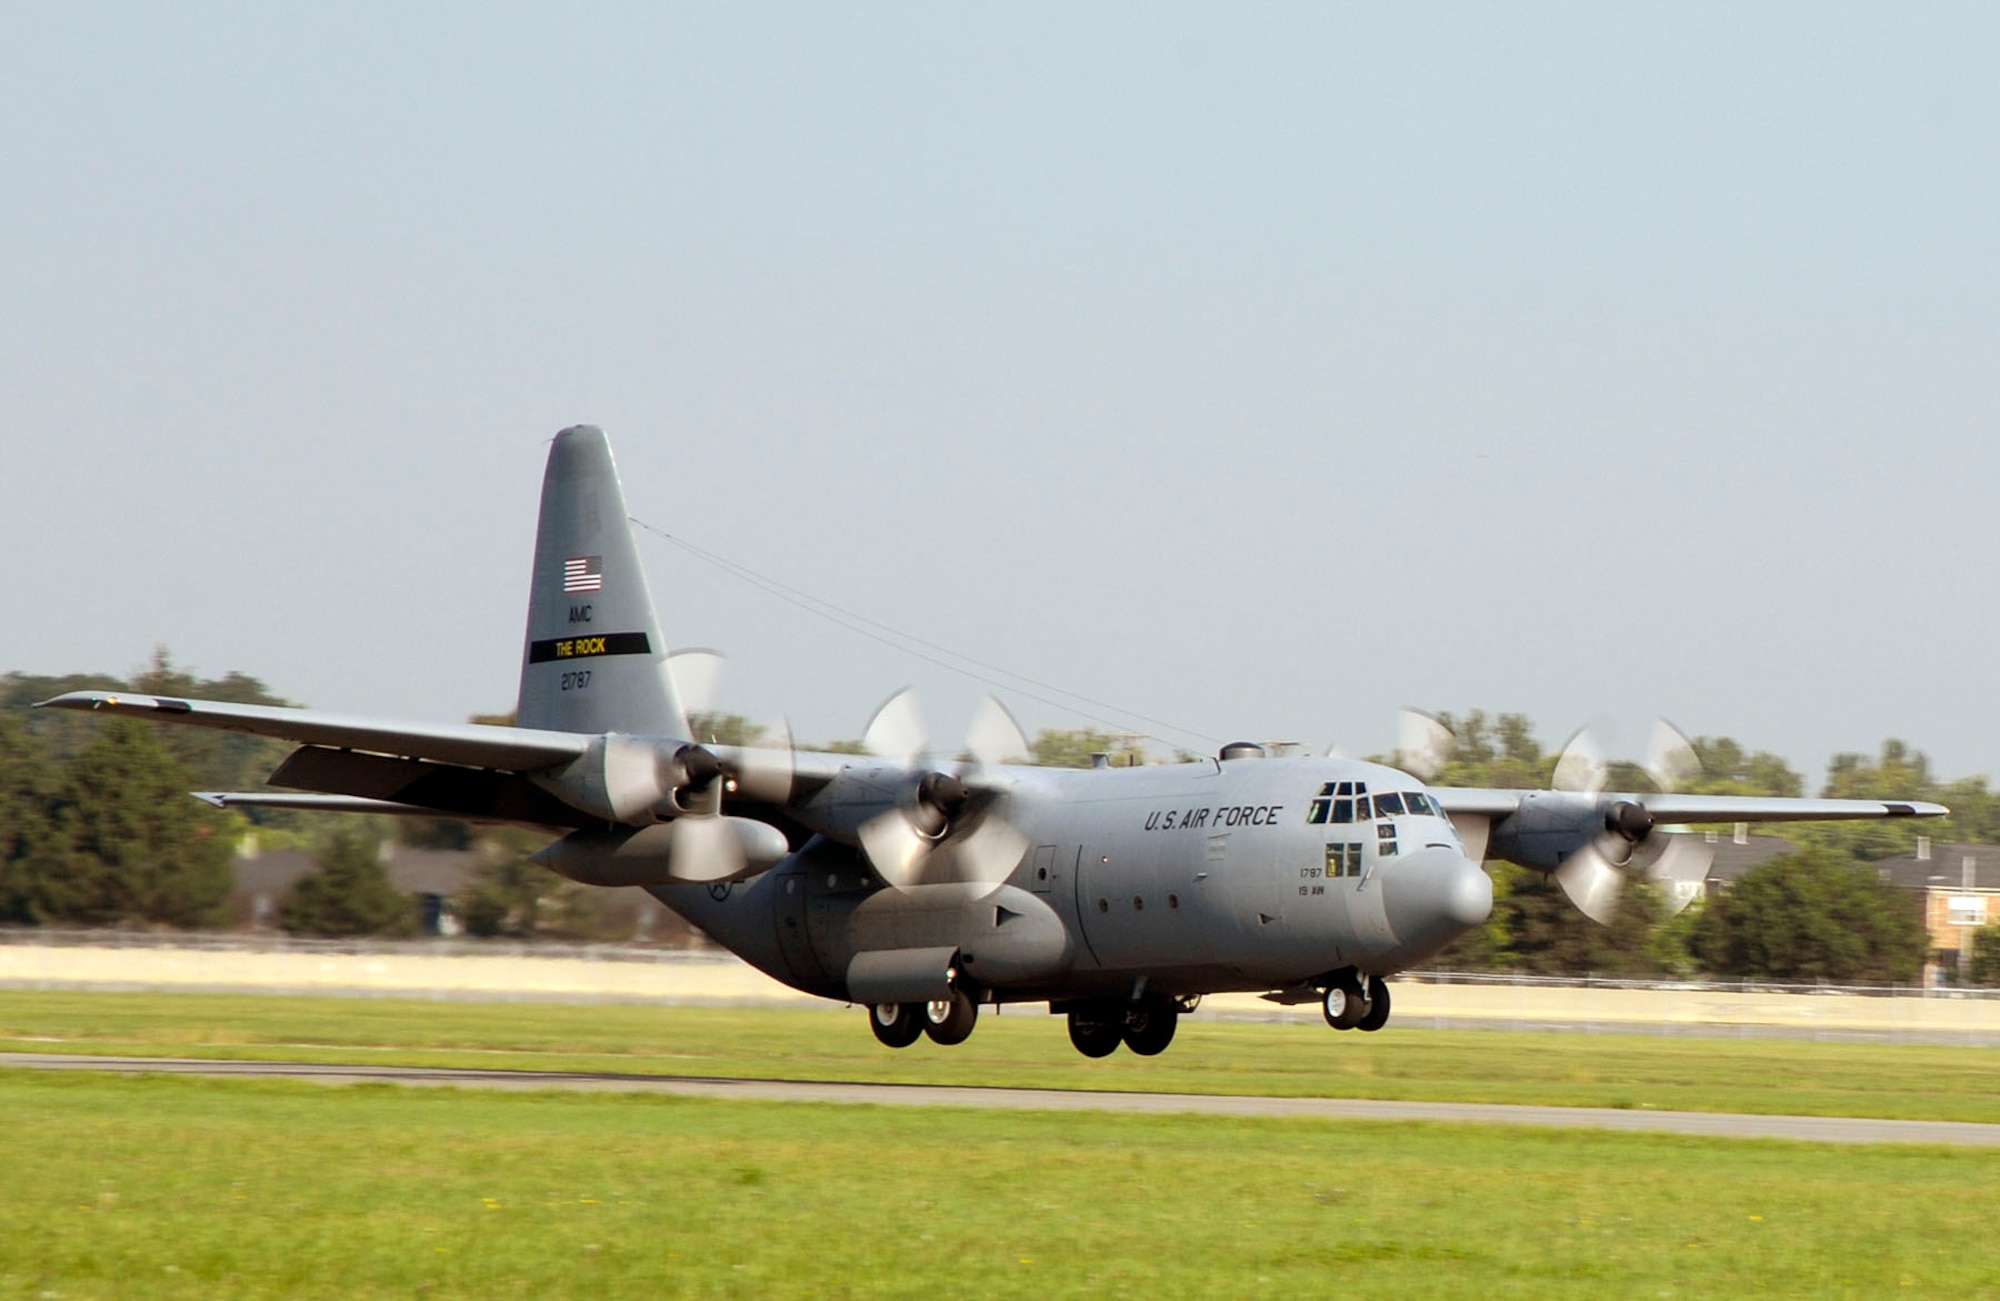 DAYTON, Ohio -- The C-130E SPARE 617 arrives at the National Museum of the U.S. Air Force after its final flight on Aug. 18, 2011. Not only is this C-130E (S/N 62-1787) representative of all C-130 transport aircraft, it also performed courageous work during the Southeast Asia War. Two members of its crew – Capt. William Caldwell, pilot, and Tech. Sgt. Charlie Shaub, loadmaster – were awarded Air Force Crosses, the U.S. Air Force’s second highest award for valor, for their heroic actions during the siege of An Loc in 1972. (U.S. Air Force photo by Michelle Gigante)